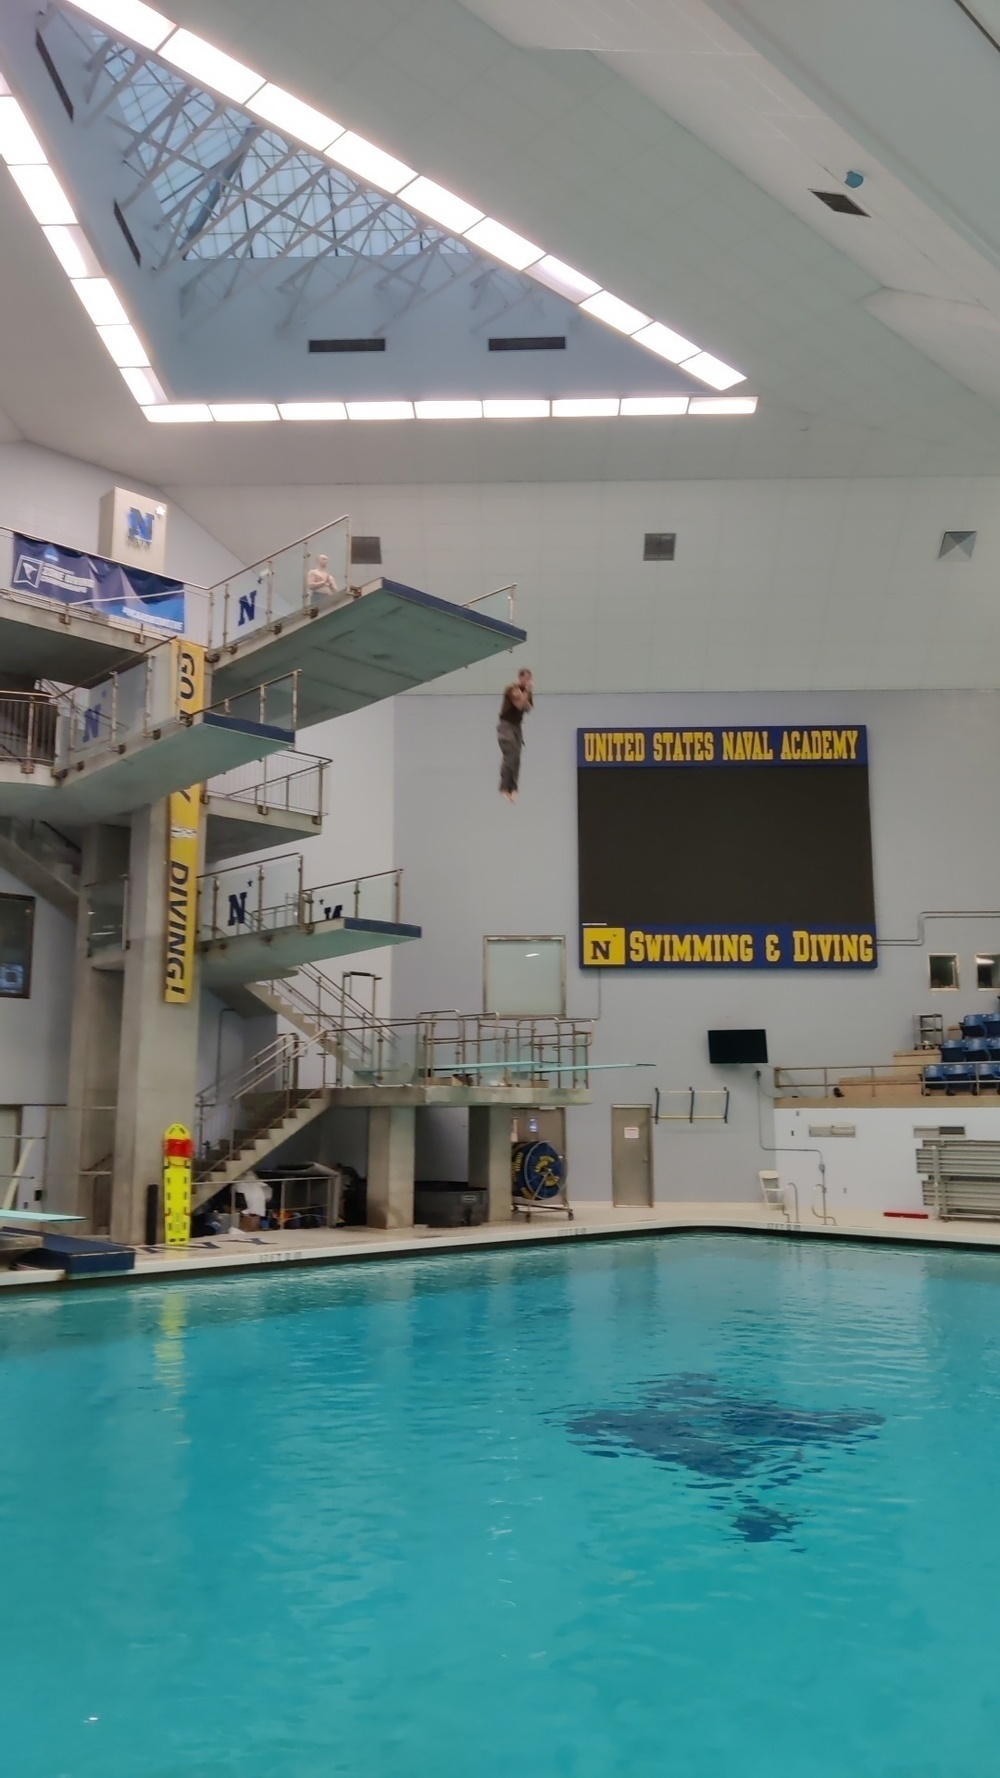 U.S. Army Nuclear Disablement Teams conduct water survival training at U.S. Naval Academy